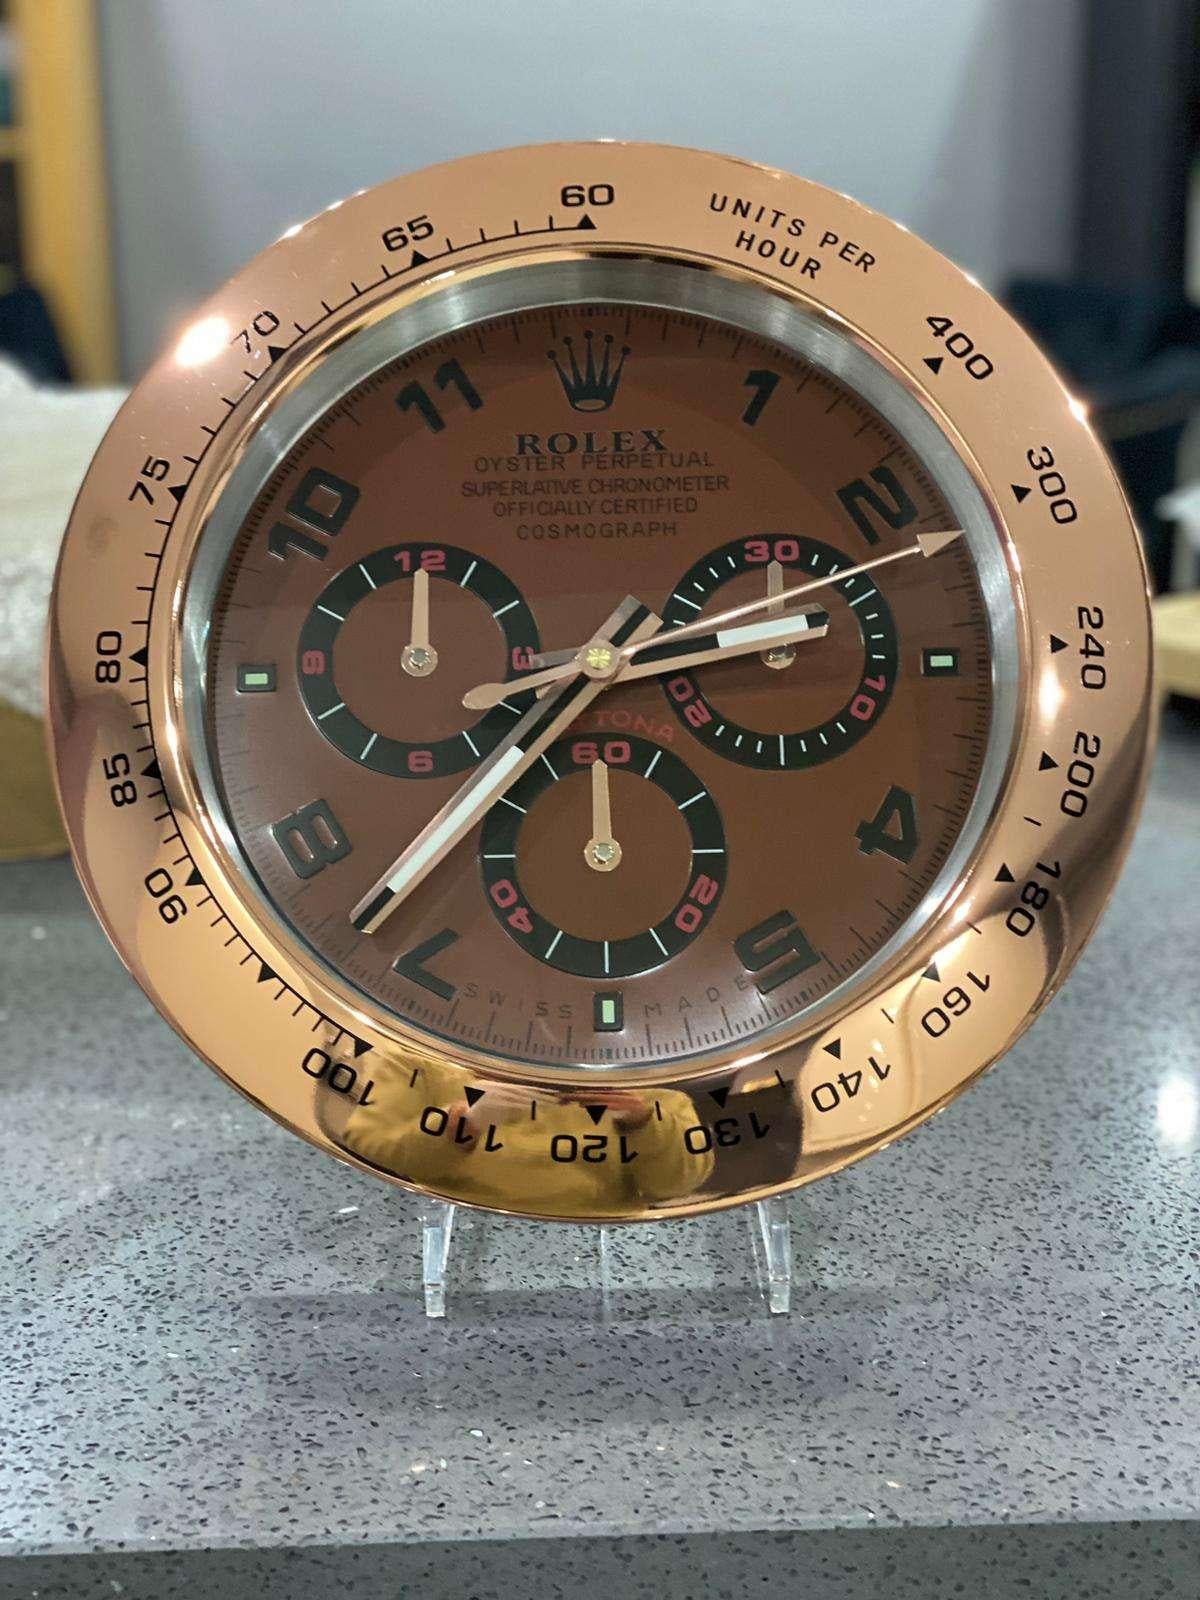 ROLEX Officially Certified Oyster Perpetual Rose Gold Chrome Wall Clock
Good condition, working.
Lume strips Sweeping Quartz movement powered by single AA Battery.
Clock dimensions measure approximately 35cm by 5cm thickness

These wall clocks are